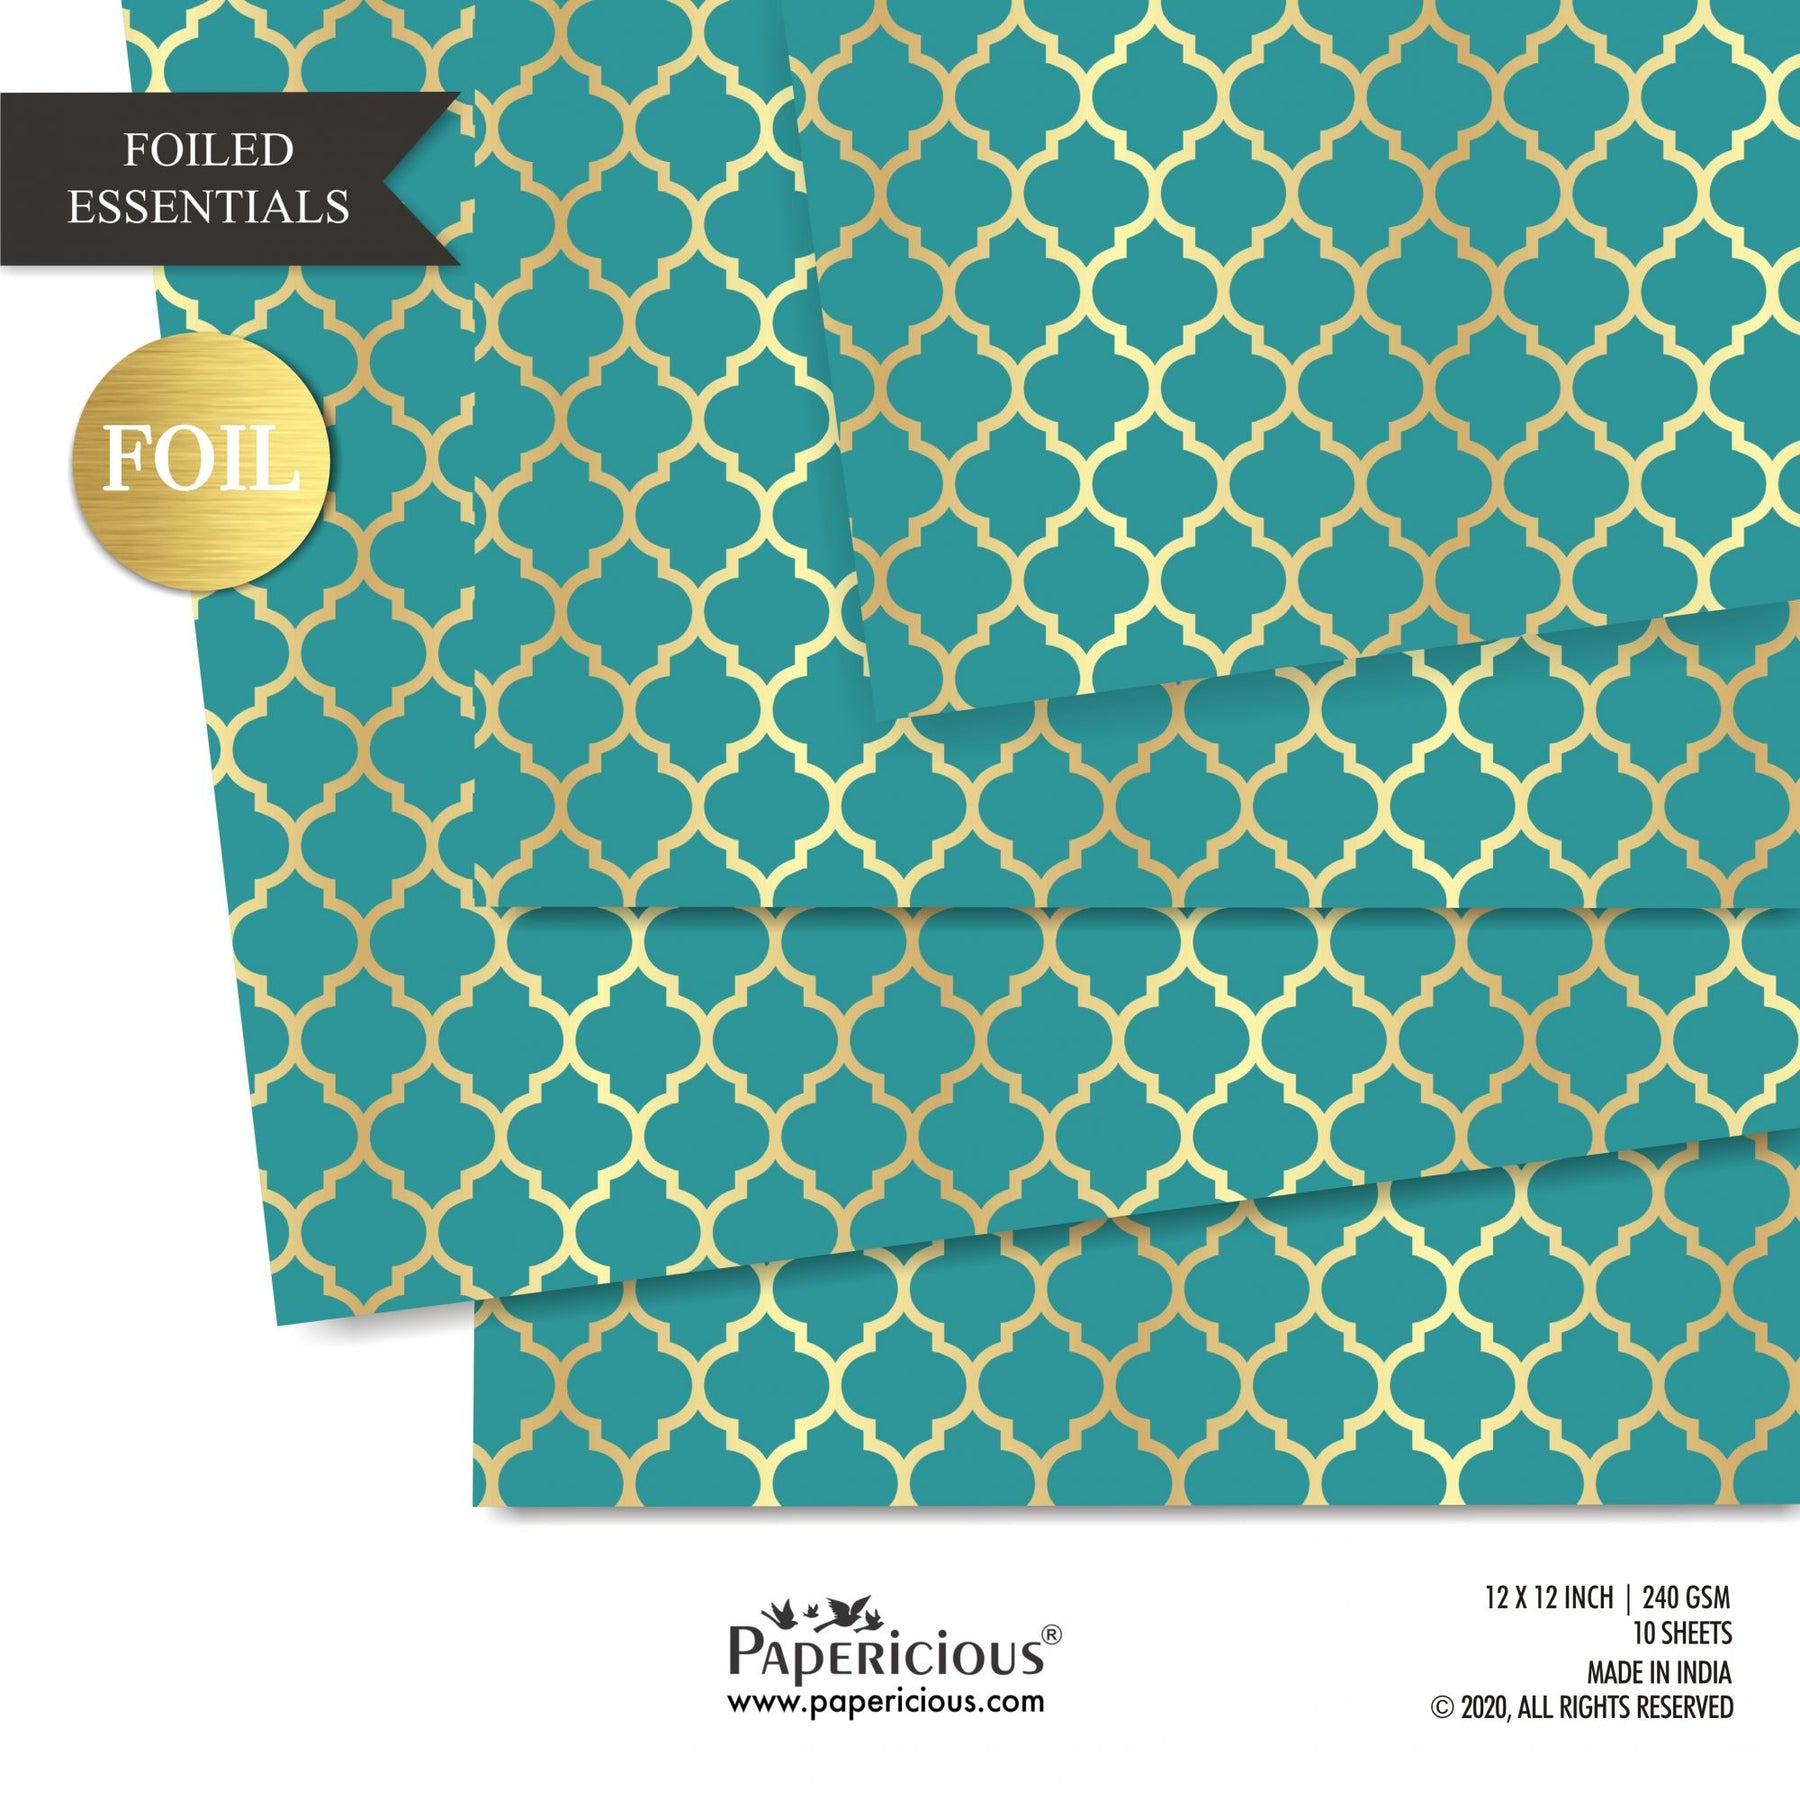 Papericious - Golden Foiled Pattern Scrapbook Papers 12x12 inch / 10 sheets / #12519